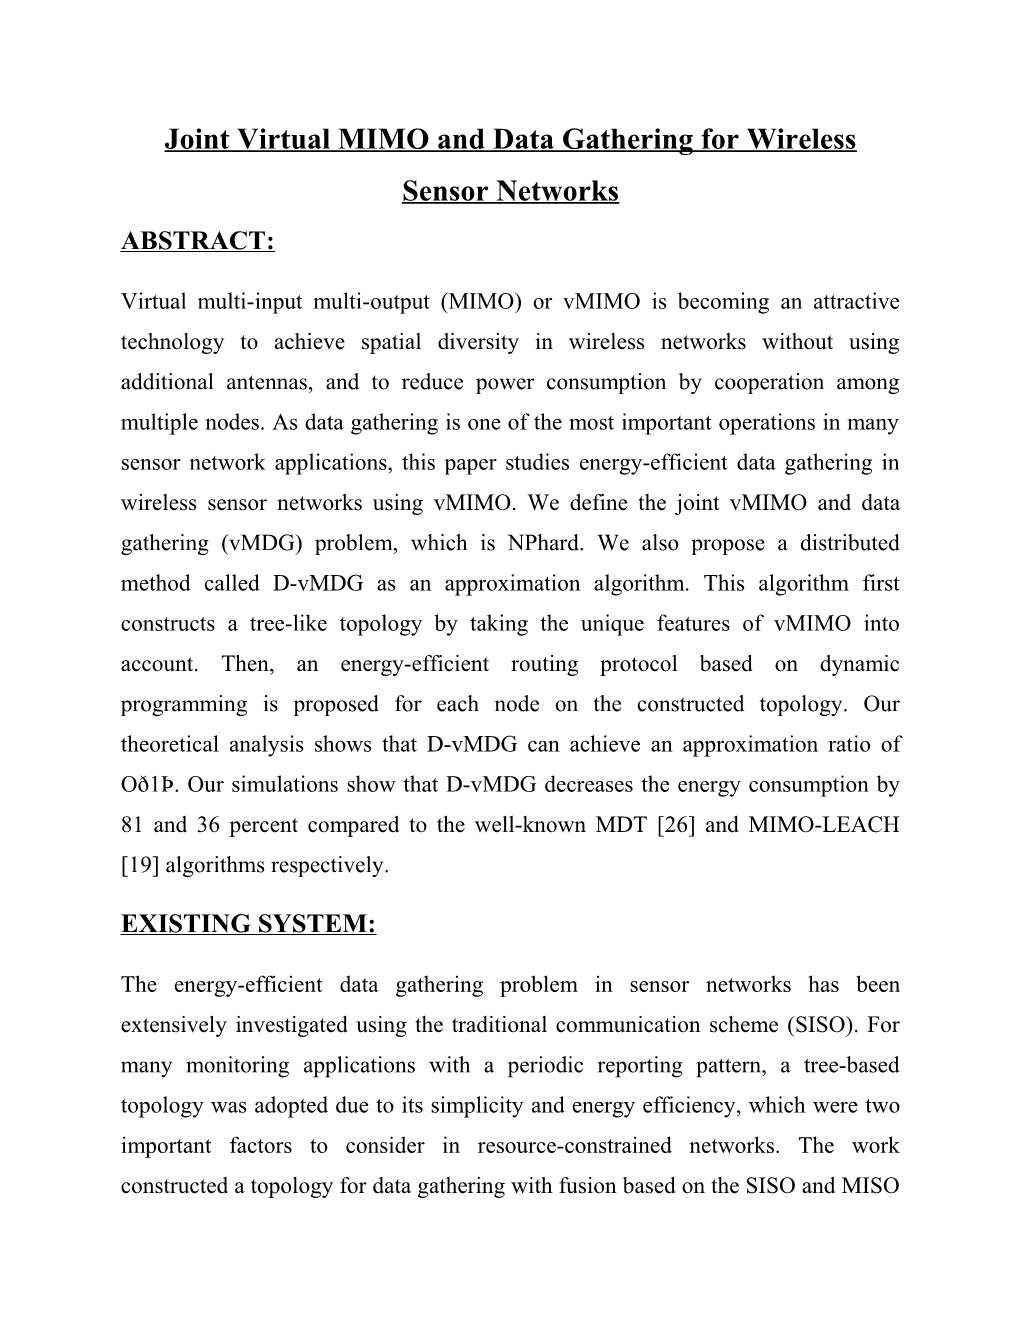 Joint Virtual MIMO and Data Gathering for Wireless Sensor Networks